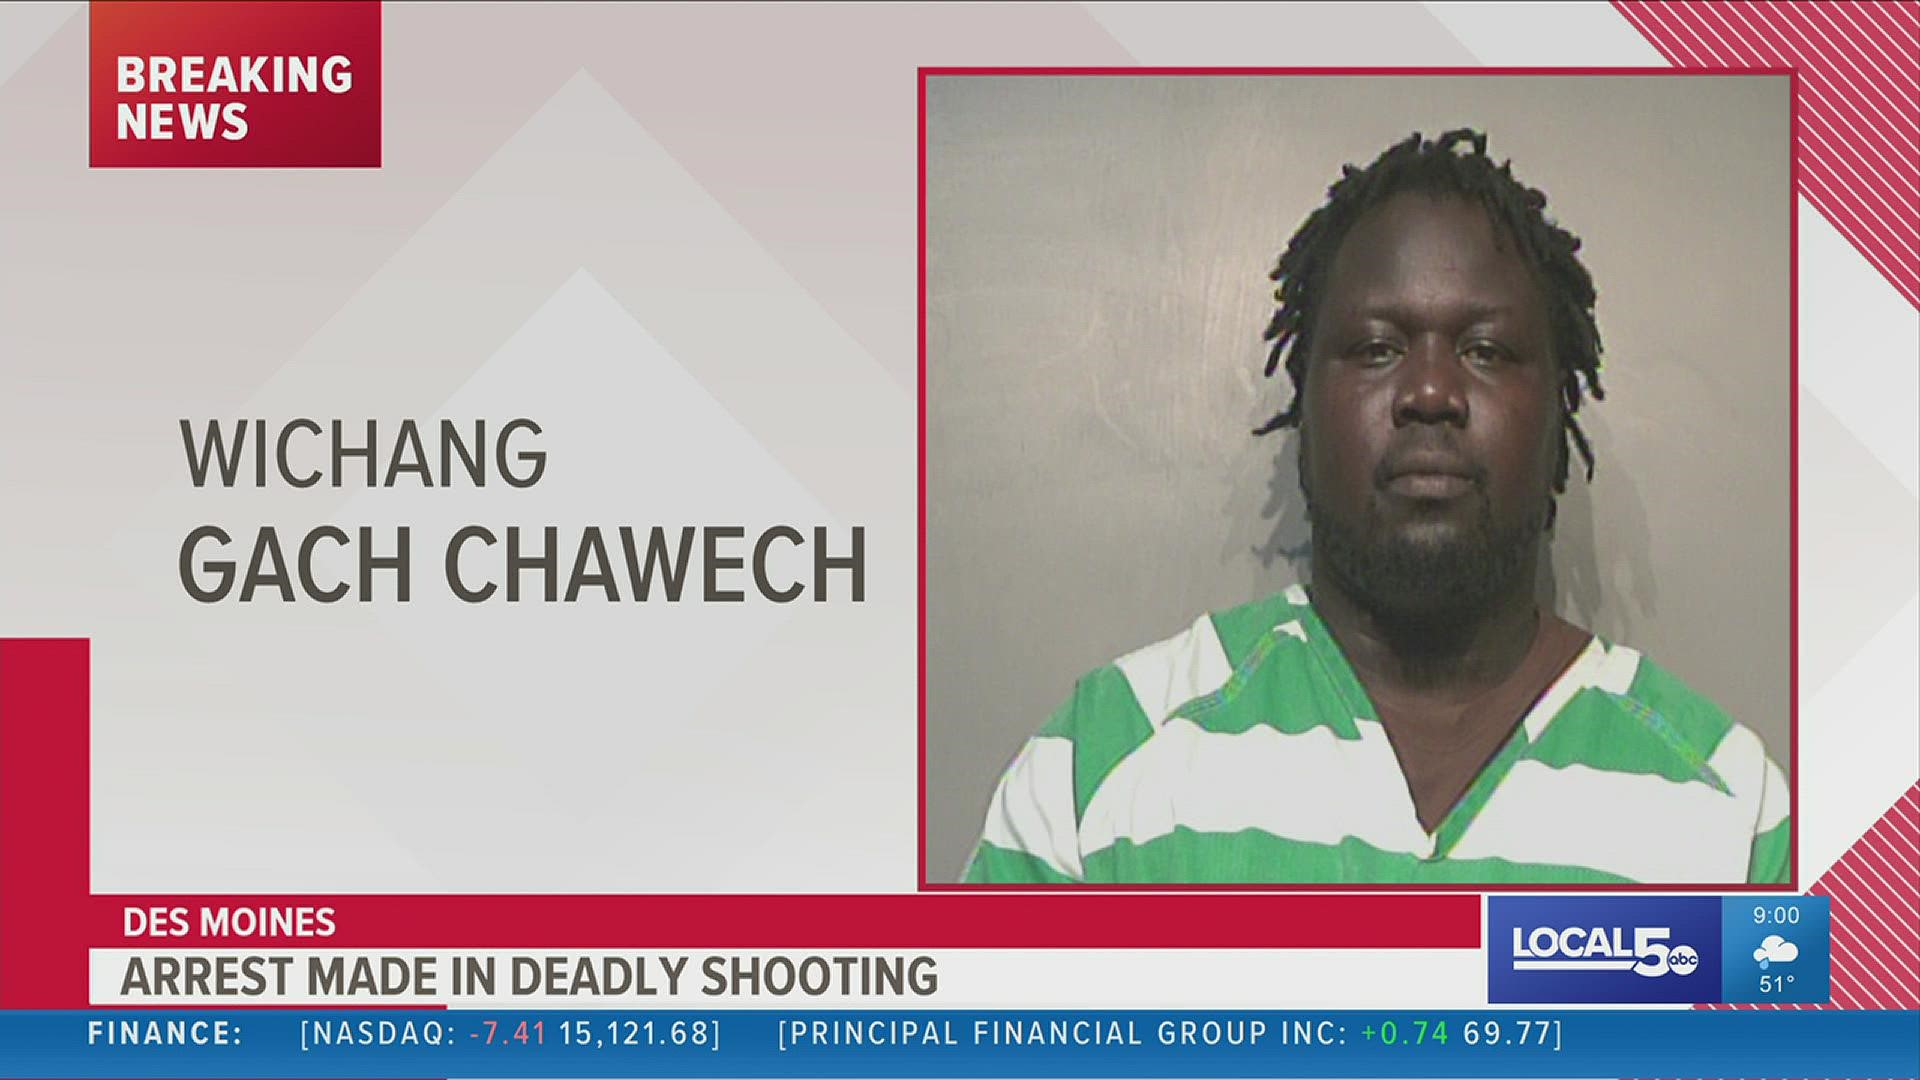 Police arrested Wichang Gach Chawech on First Degree Murder and several other charges for the fatal shooting of Nyamal Deng.